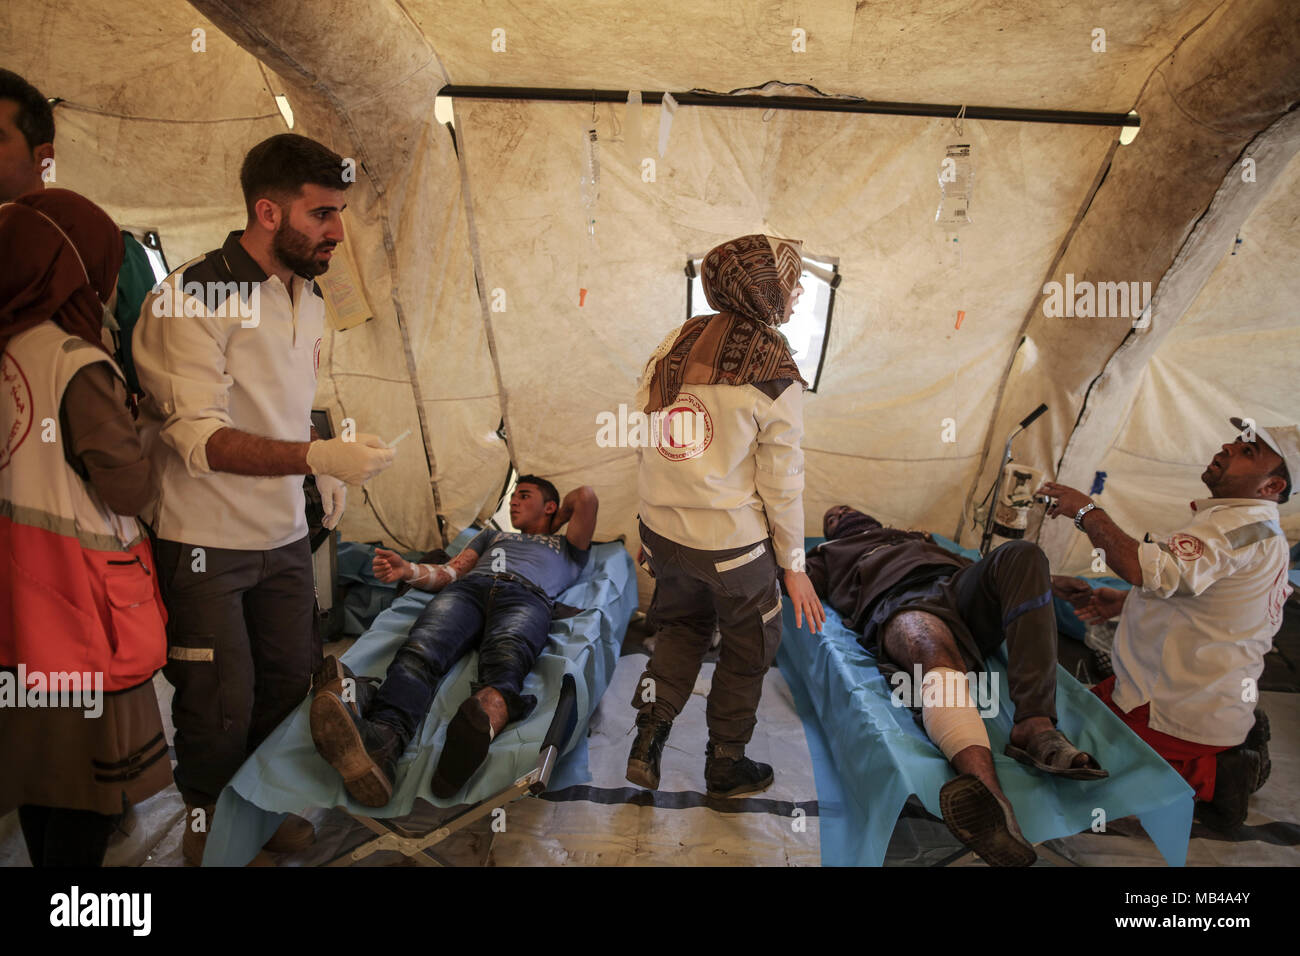 Jabalia, Gaza Strip. 06th Apr, 2018. Injured Palestinian protestors receive treatment at a medical tent during clashes with Israeli Security Forces along the Israel-Gaza border in Jabalia, Gaza Strip, 06 April 2018. Thousands of Palestinians are marching to the border area for the second week of a six-week long protest dubbed the 'Great March of Return' along the Gaza-Israel border. The march is to highlight the hundreds of thousands of Palestinian refugees who were expelled or fled their homes during the 1948 war that marked Israel's creation. Credit: Wissam Nassar/dpa/Alamy Live News Stock Photo